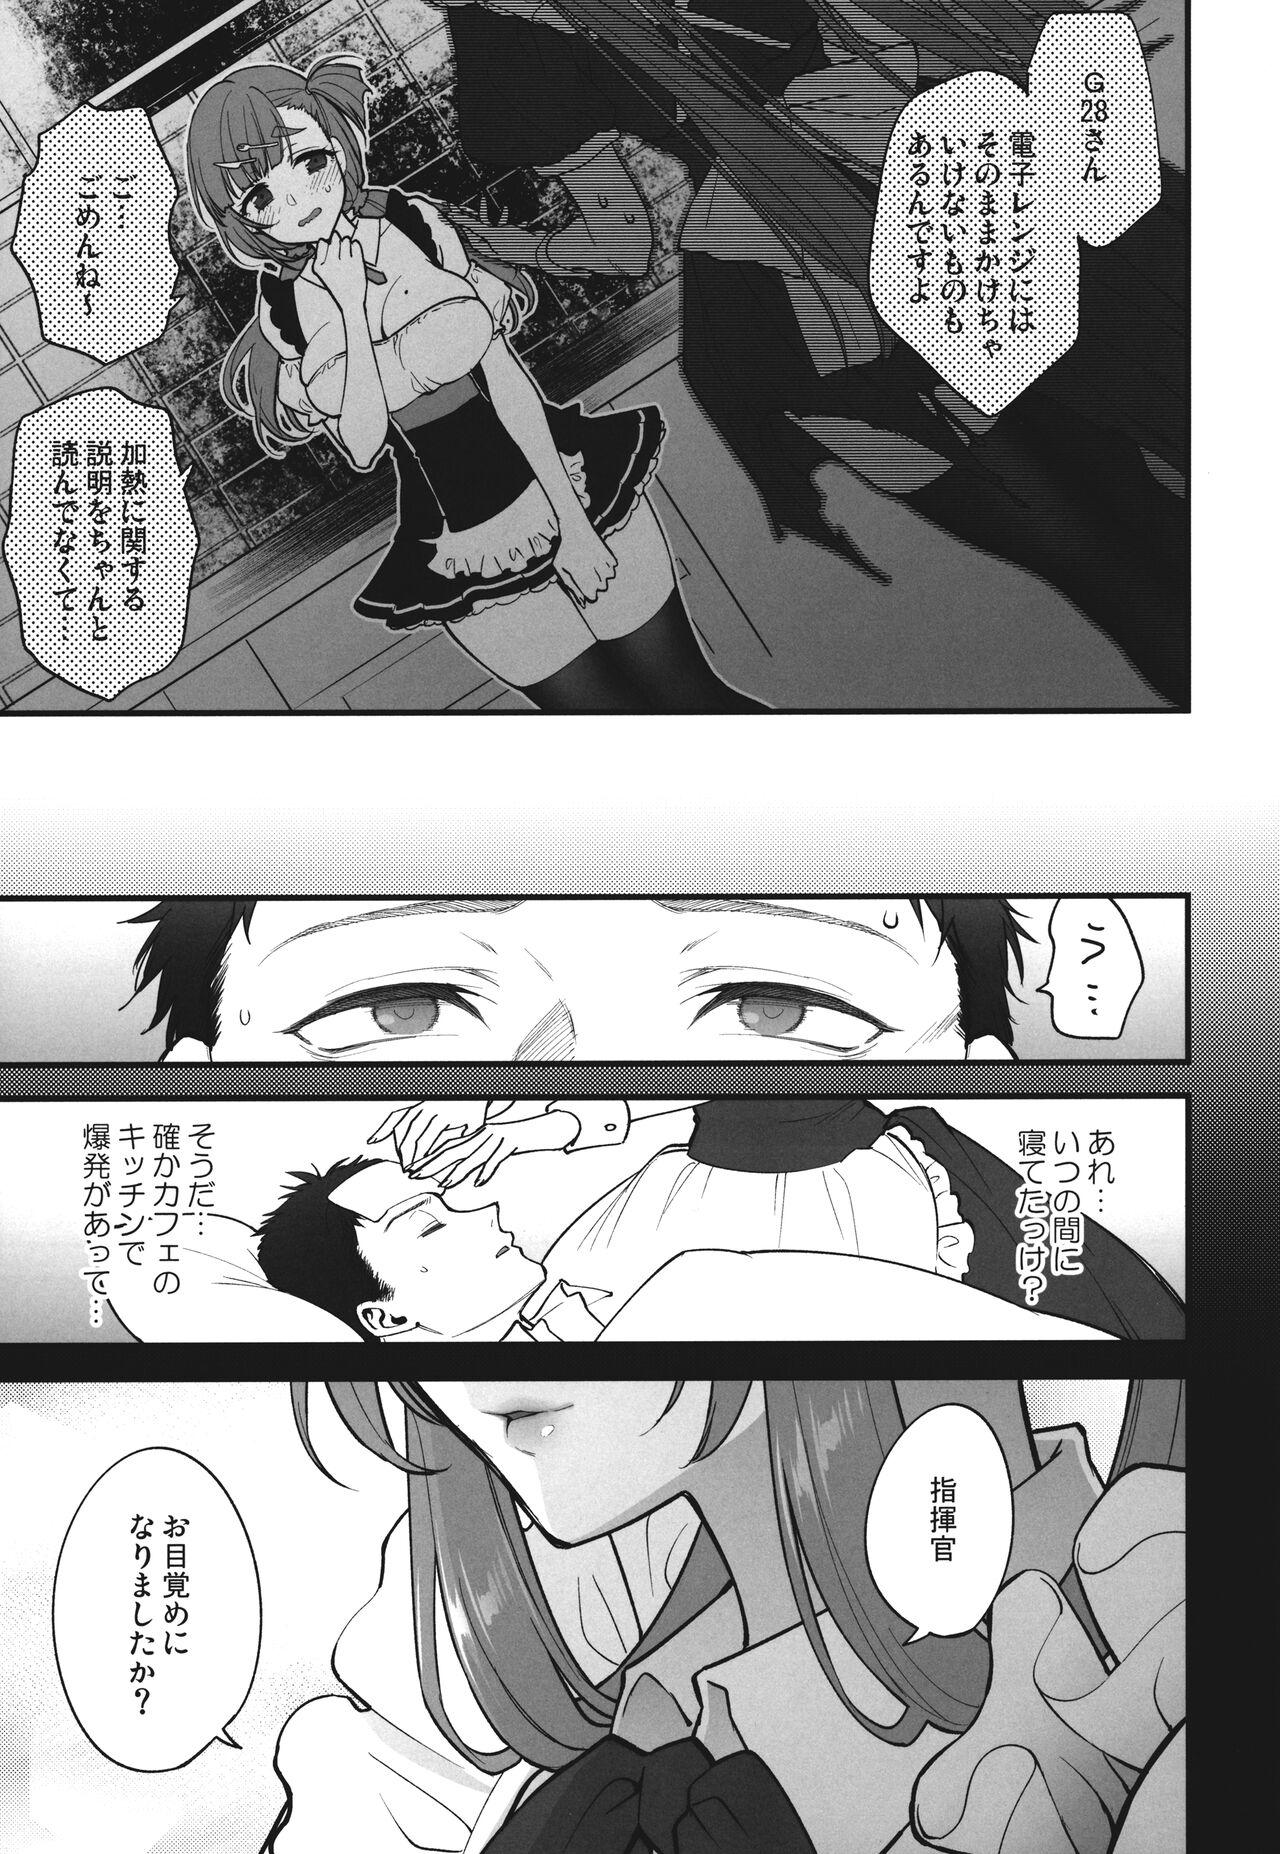 Big Butt Make me Yours - Girls frontline Teensnow - Page 6